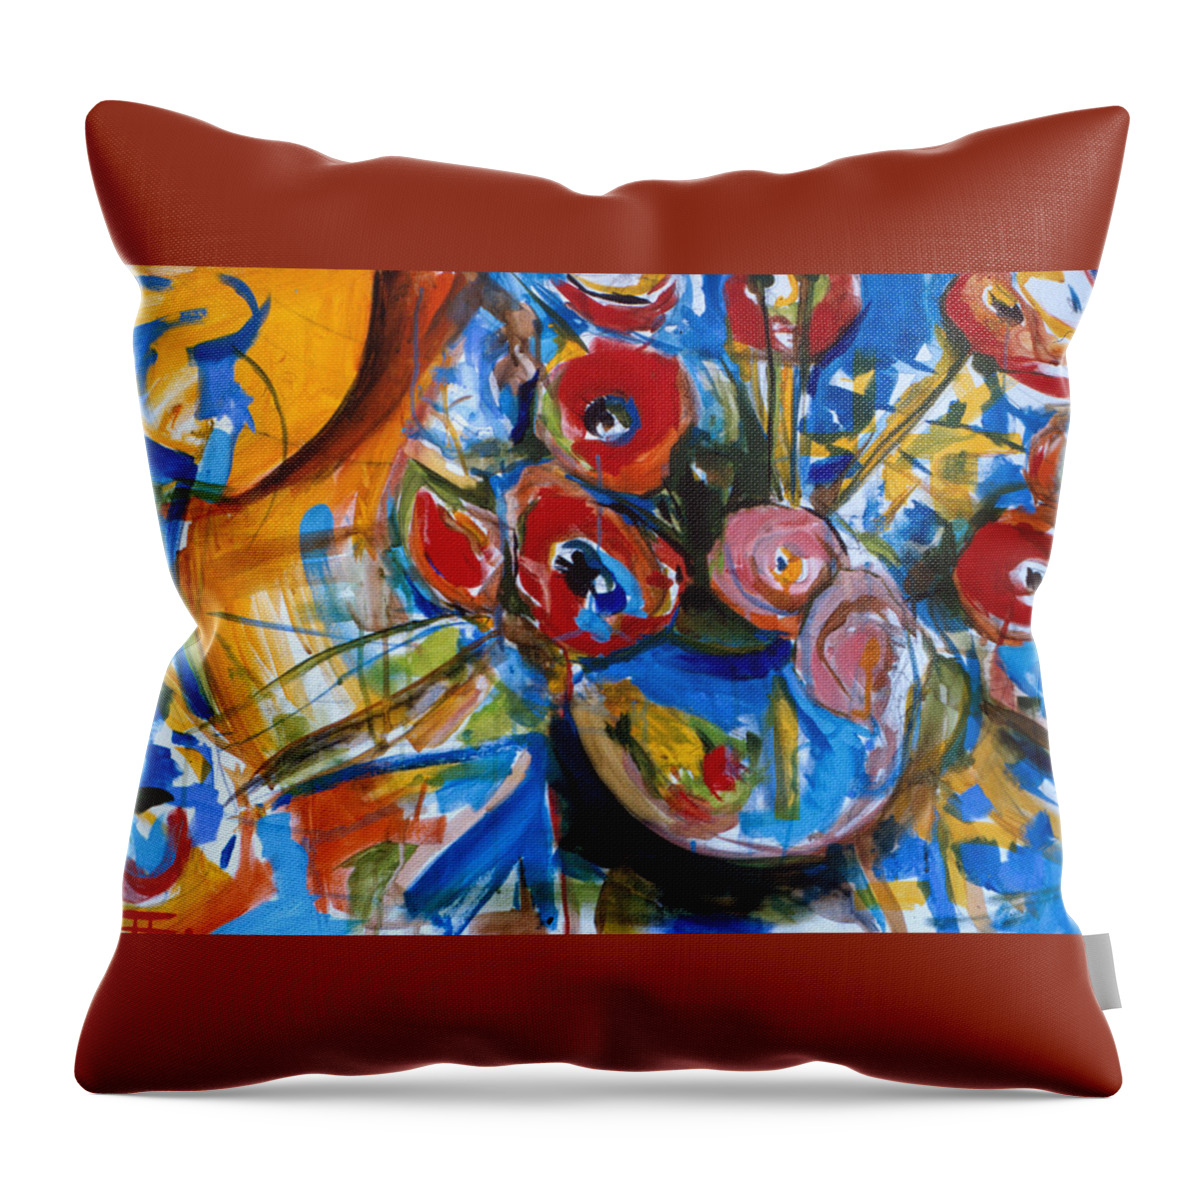 Poppies Throw Pillow featuring the painting Poppies by John Gholson